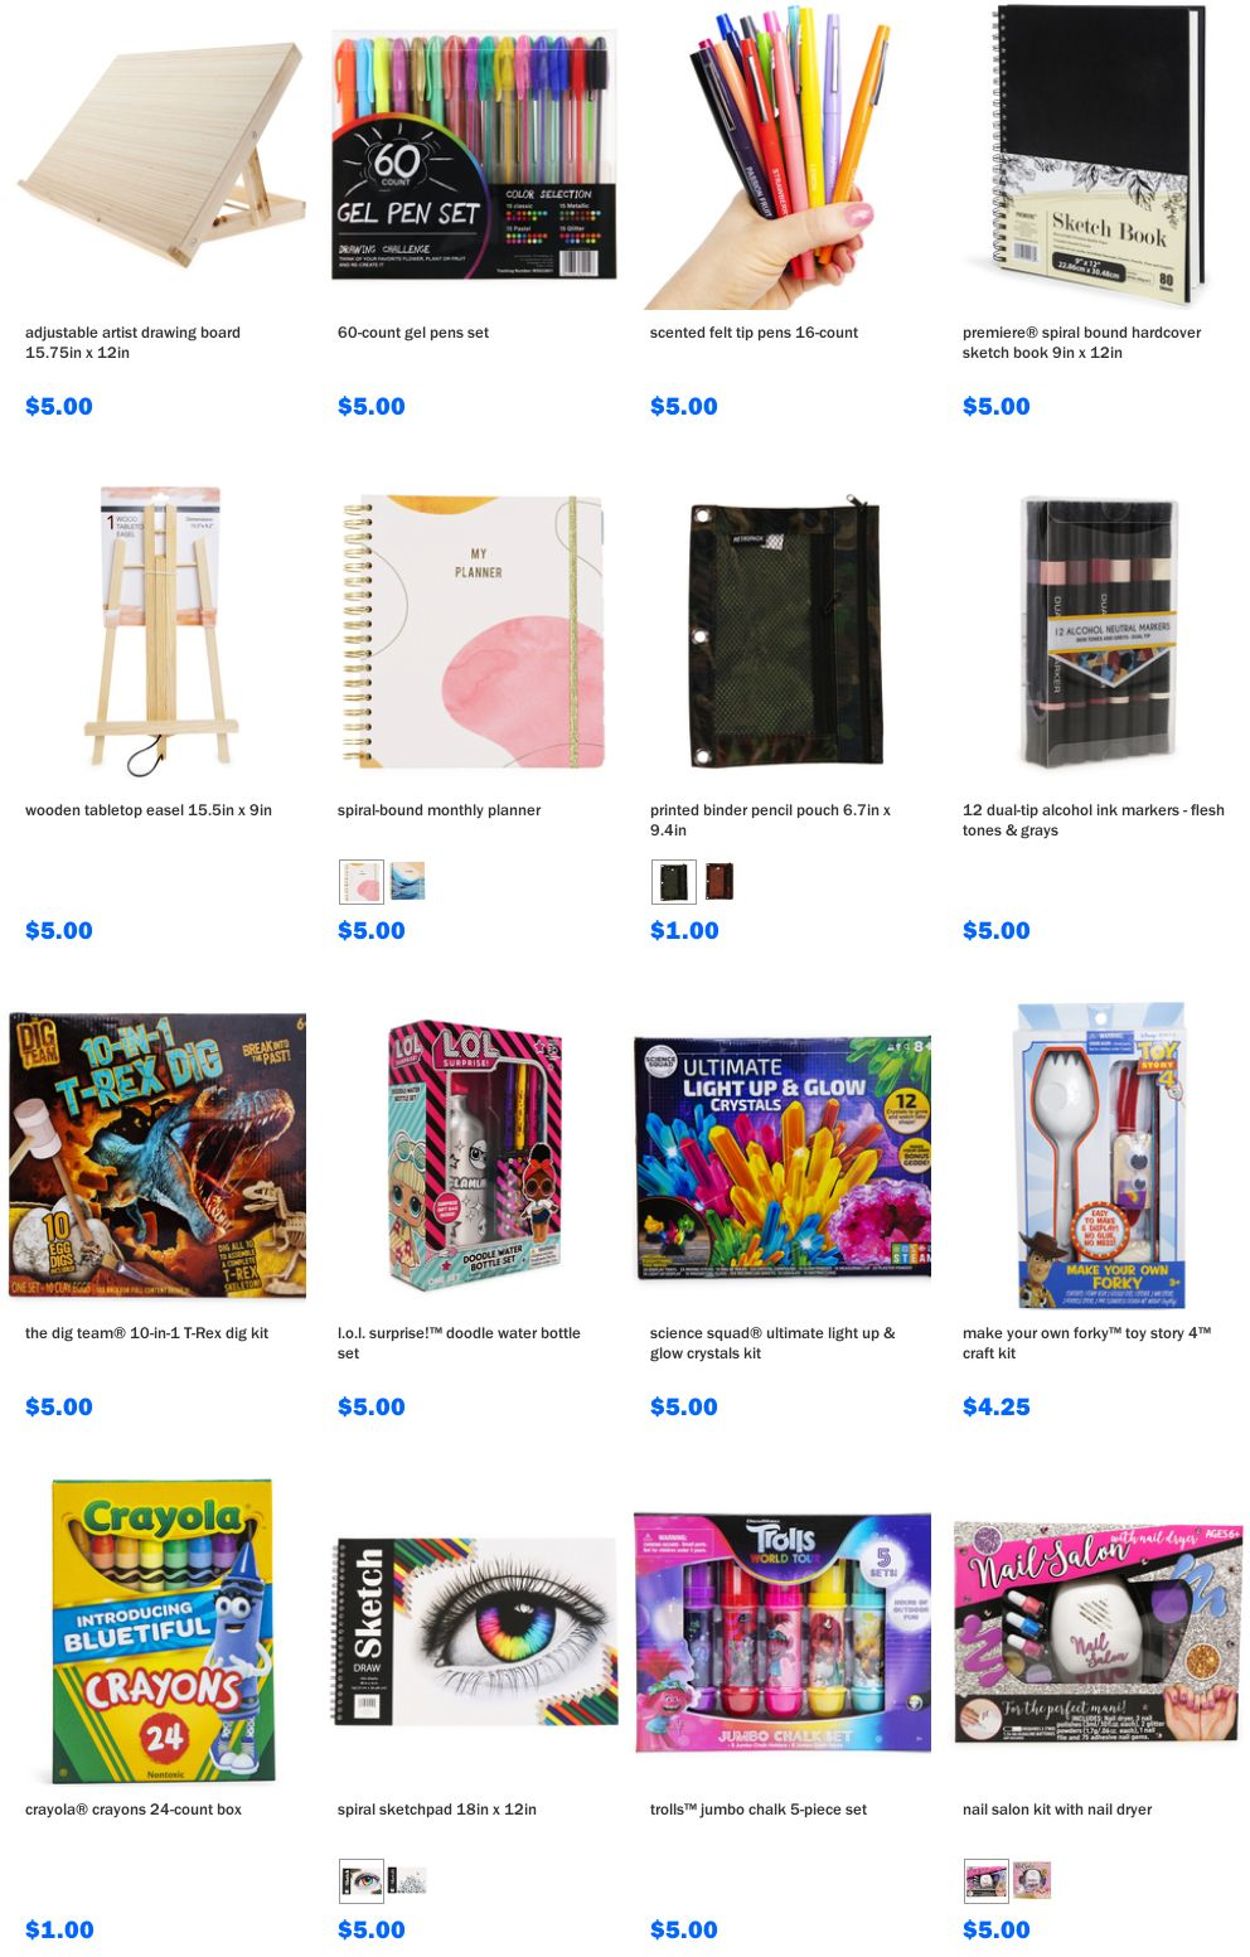 Catalogue Five Below HOLIDAY 2021 from 11/03/2021